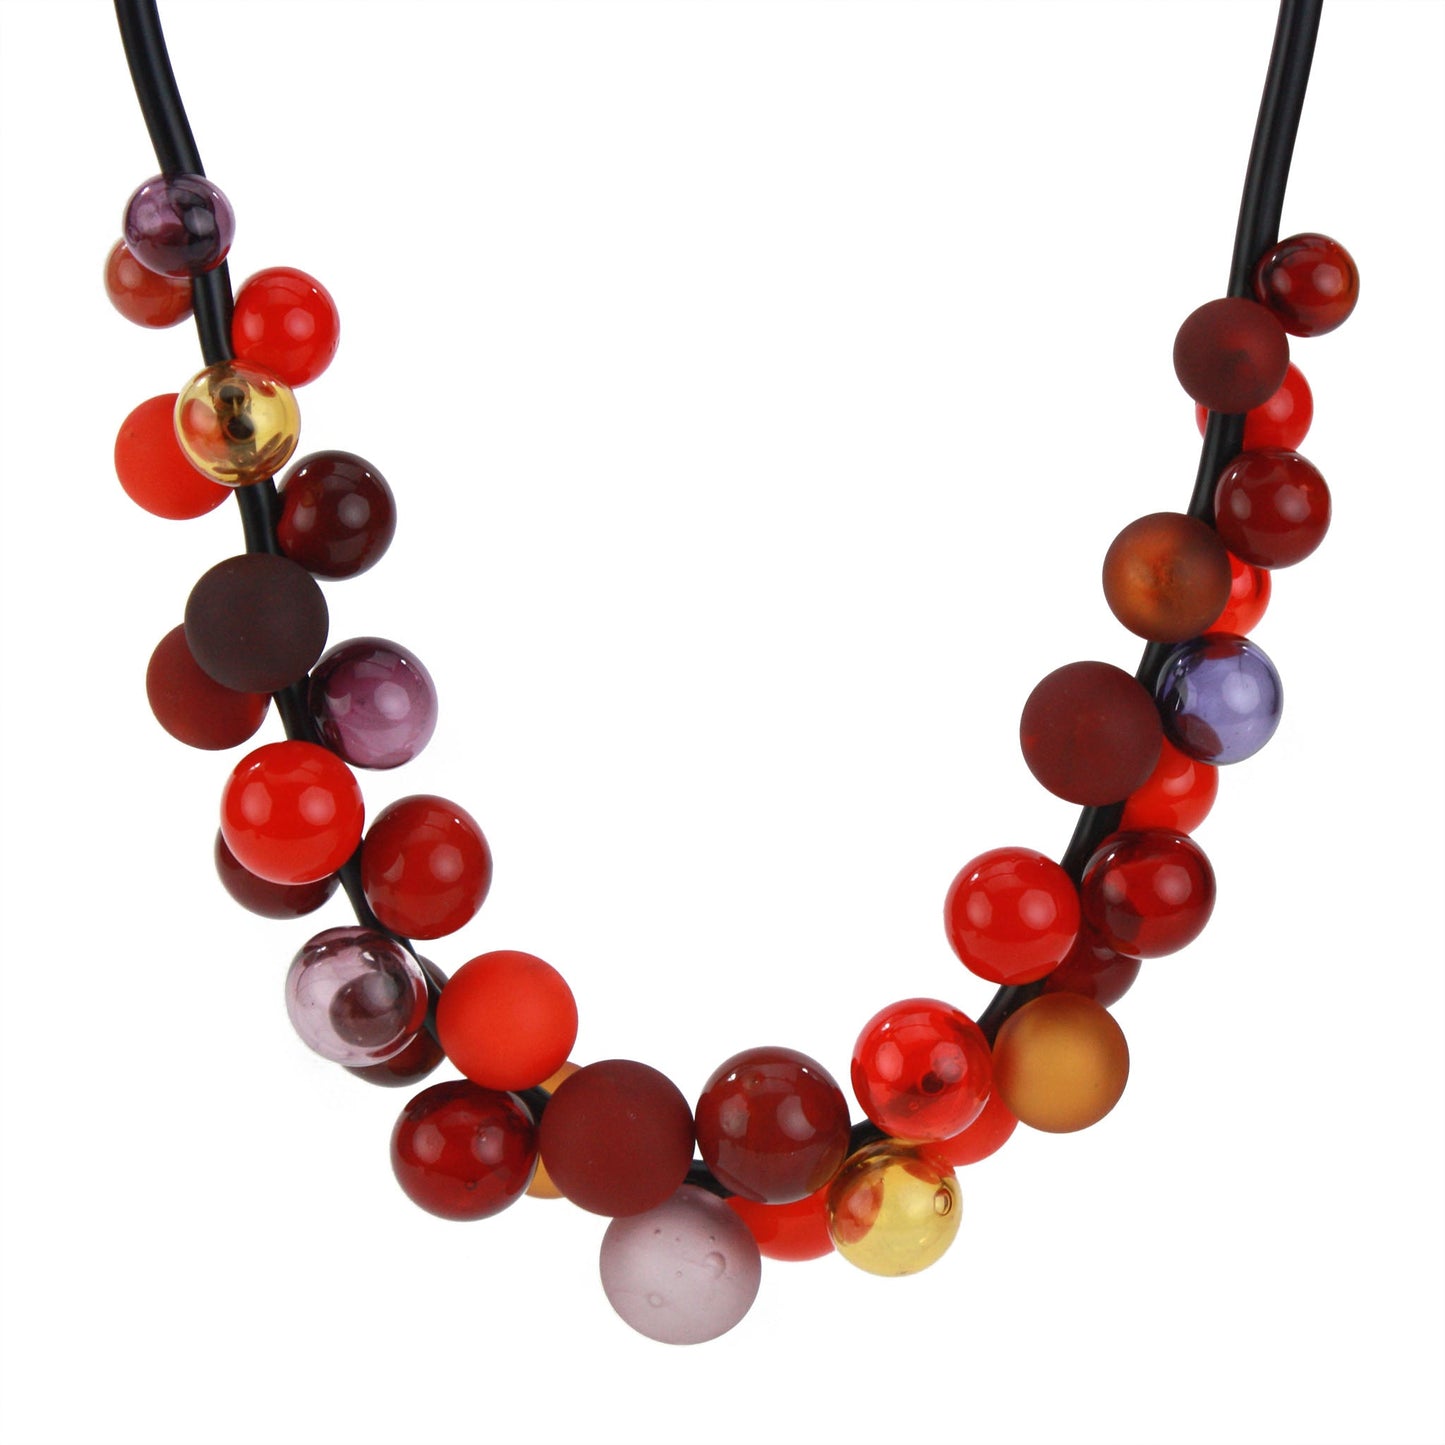 Bolla full cluster necklace - mixed shades of reds